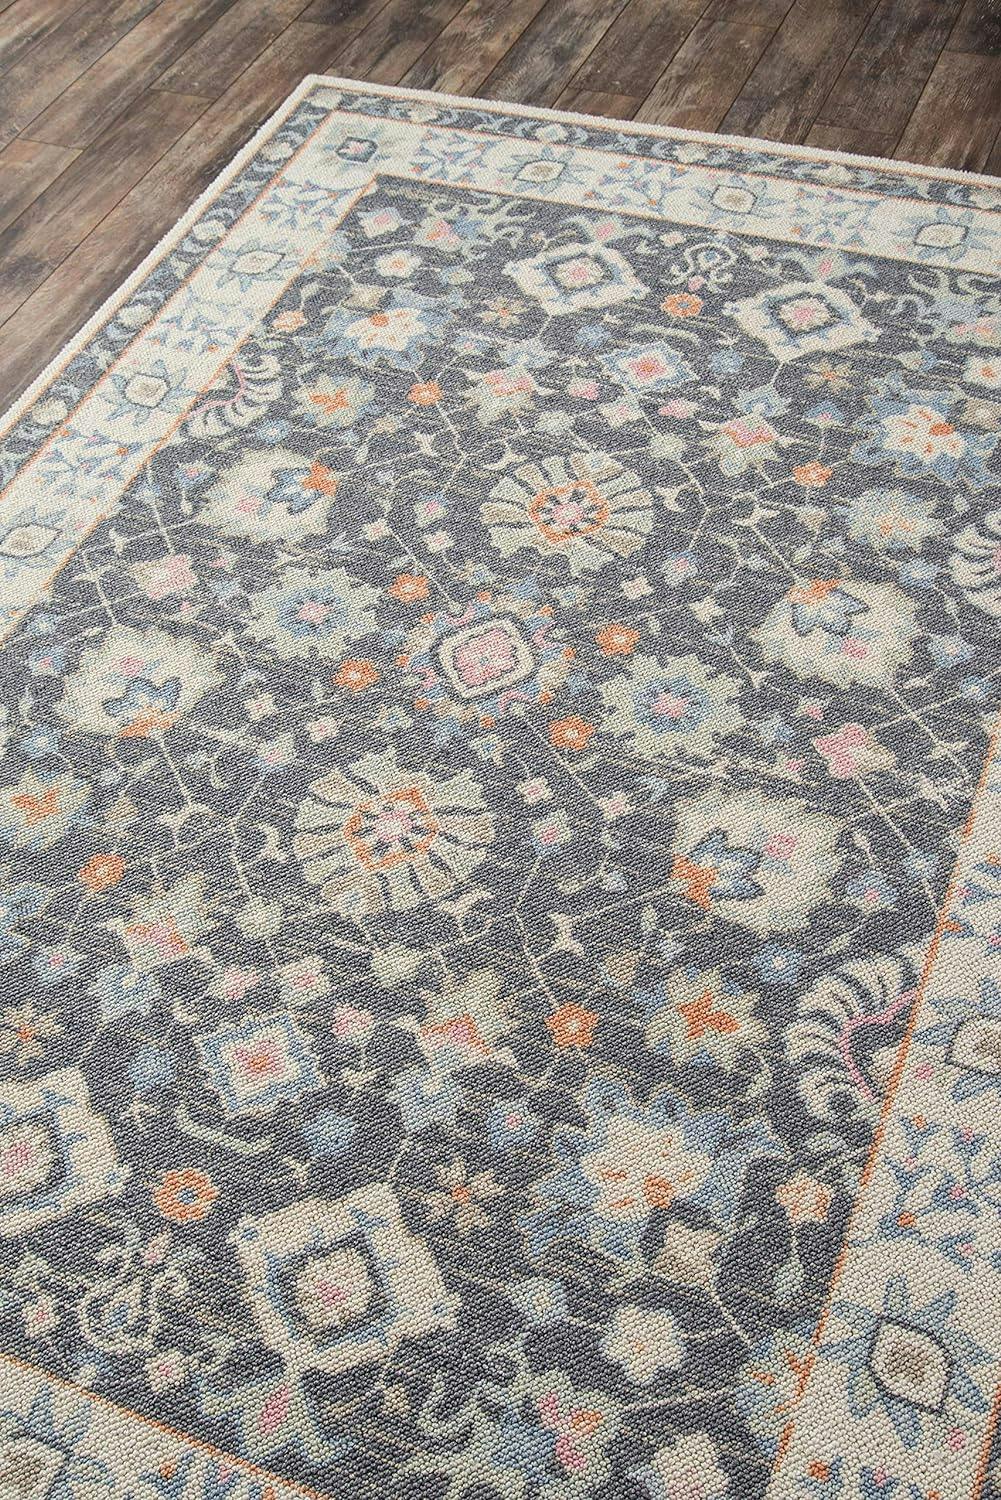 Anatolia Charcoal Medallion 6'6" x 9' Wool-Synthetic Blend Rug